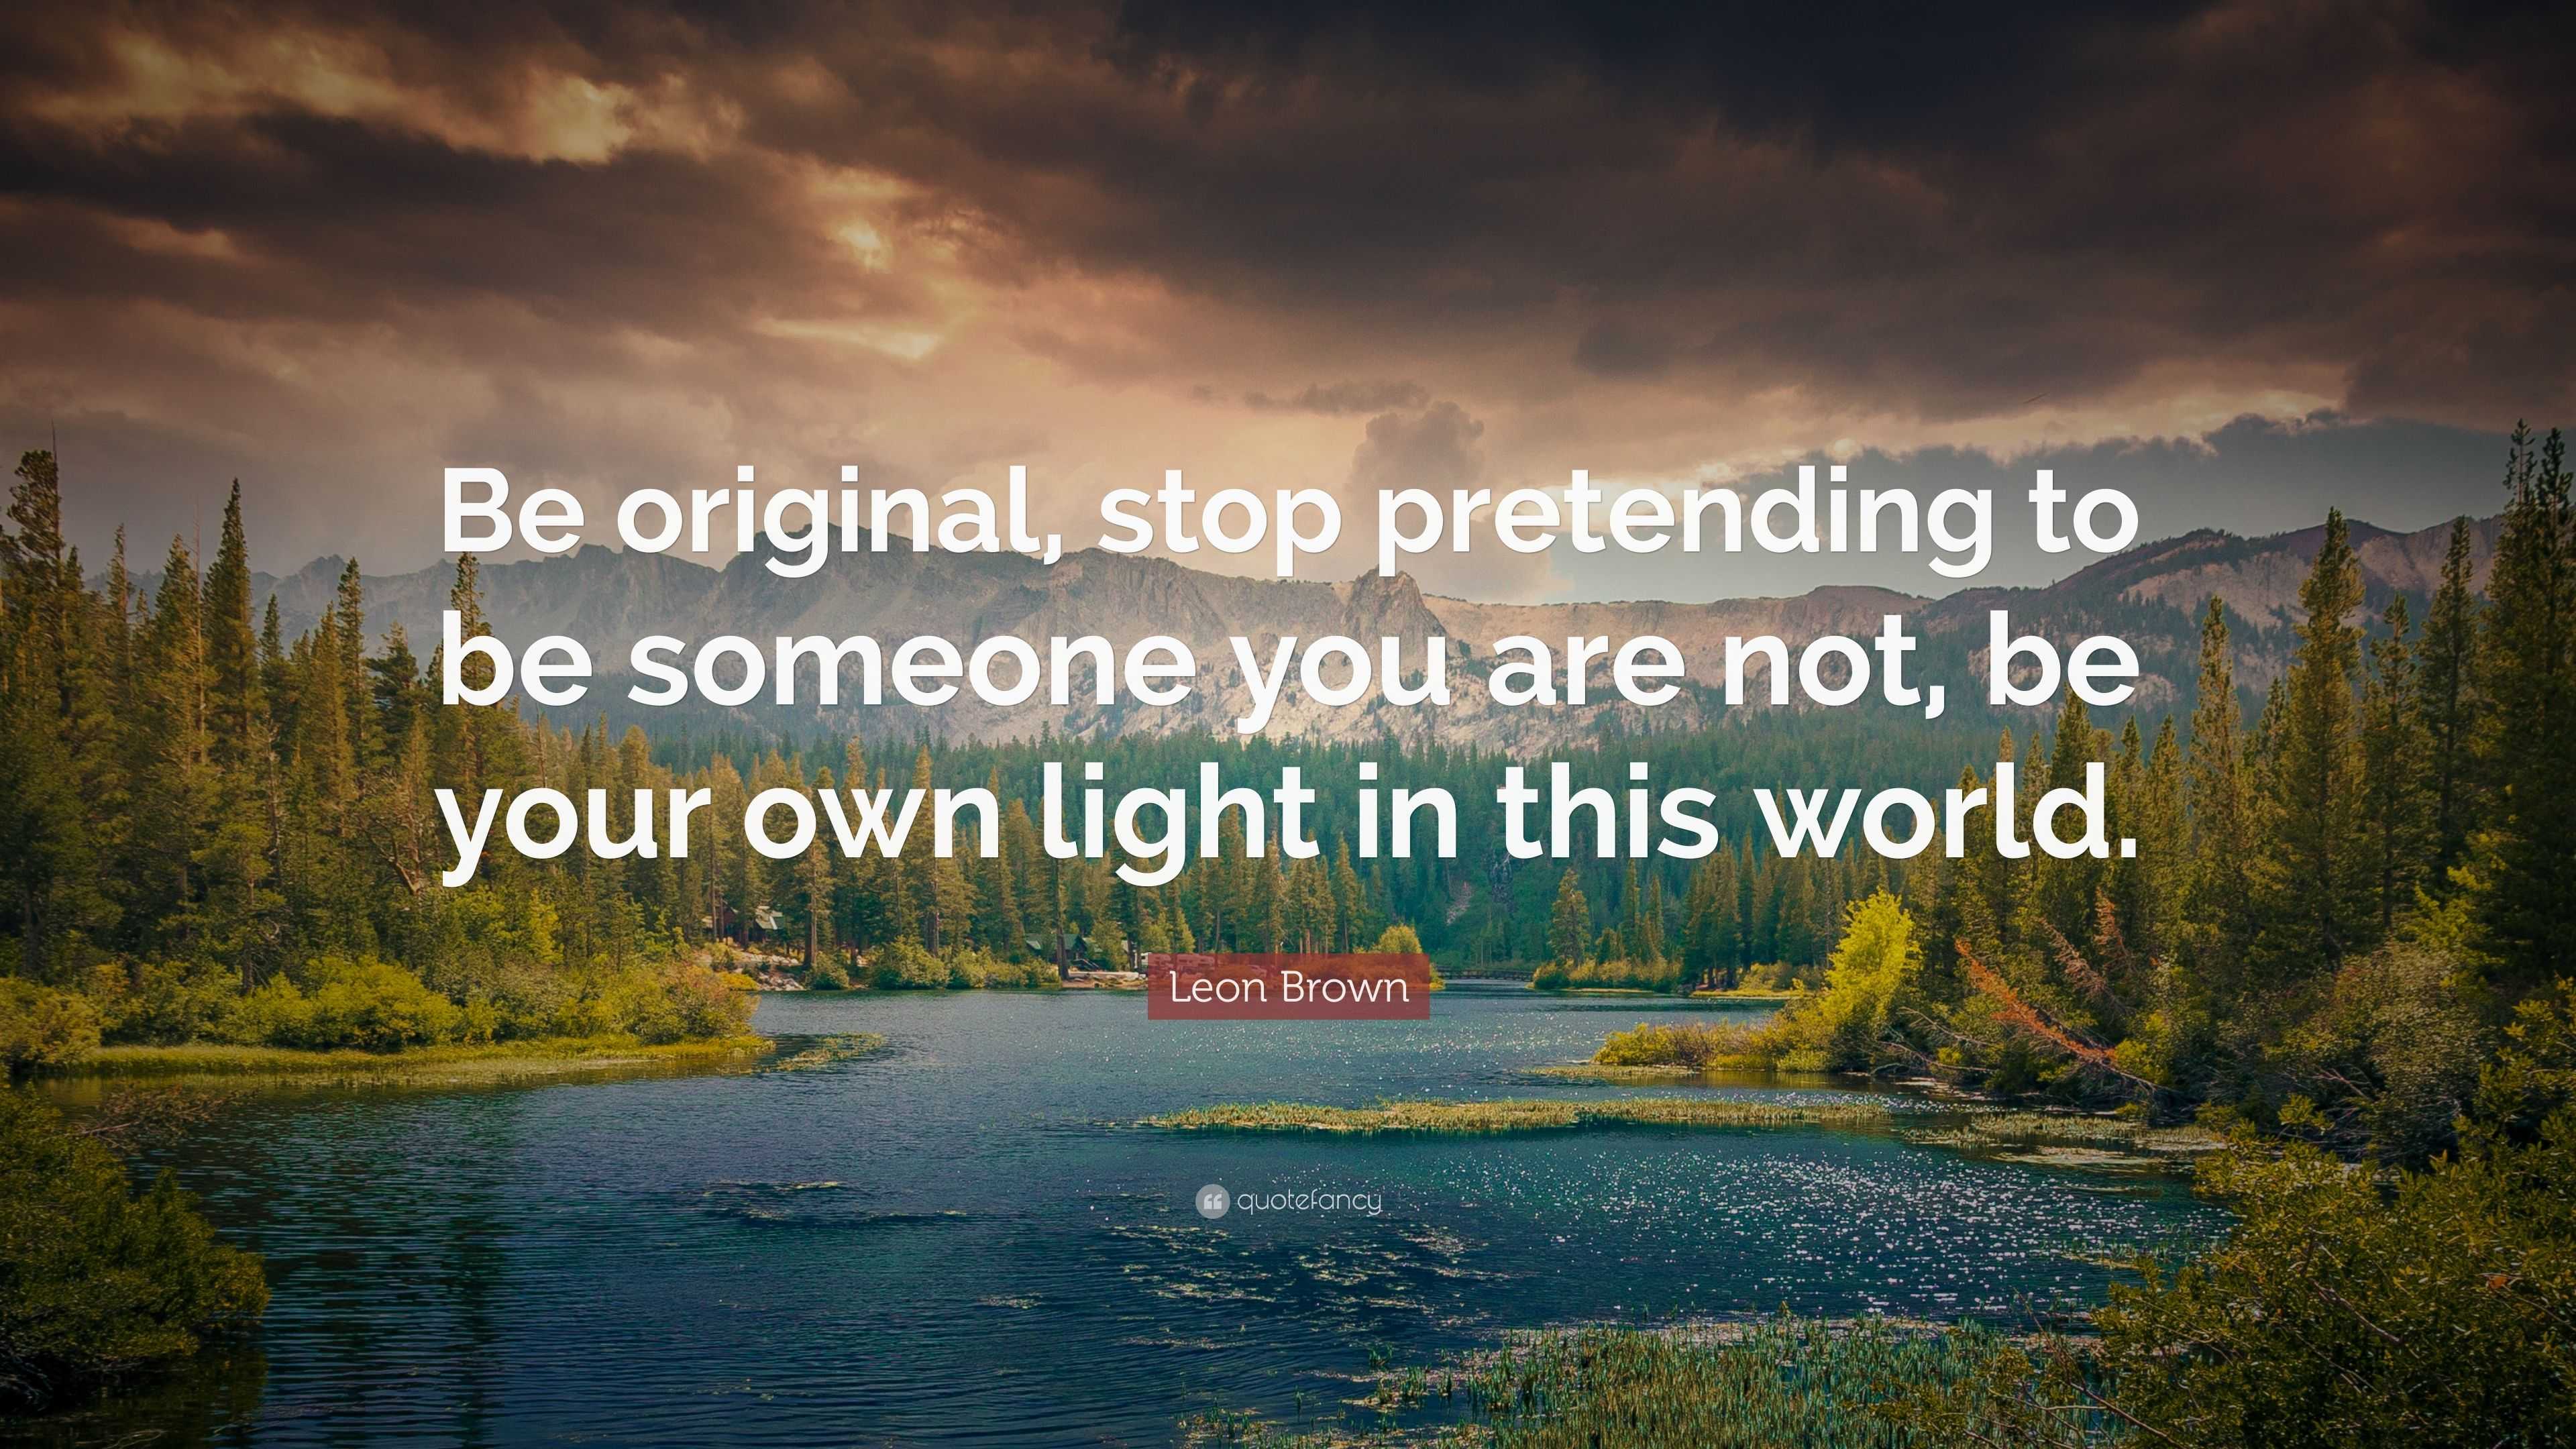 Being Yourself: Stop Pretending To Be Someone You're Not